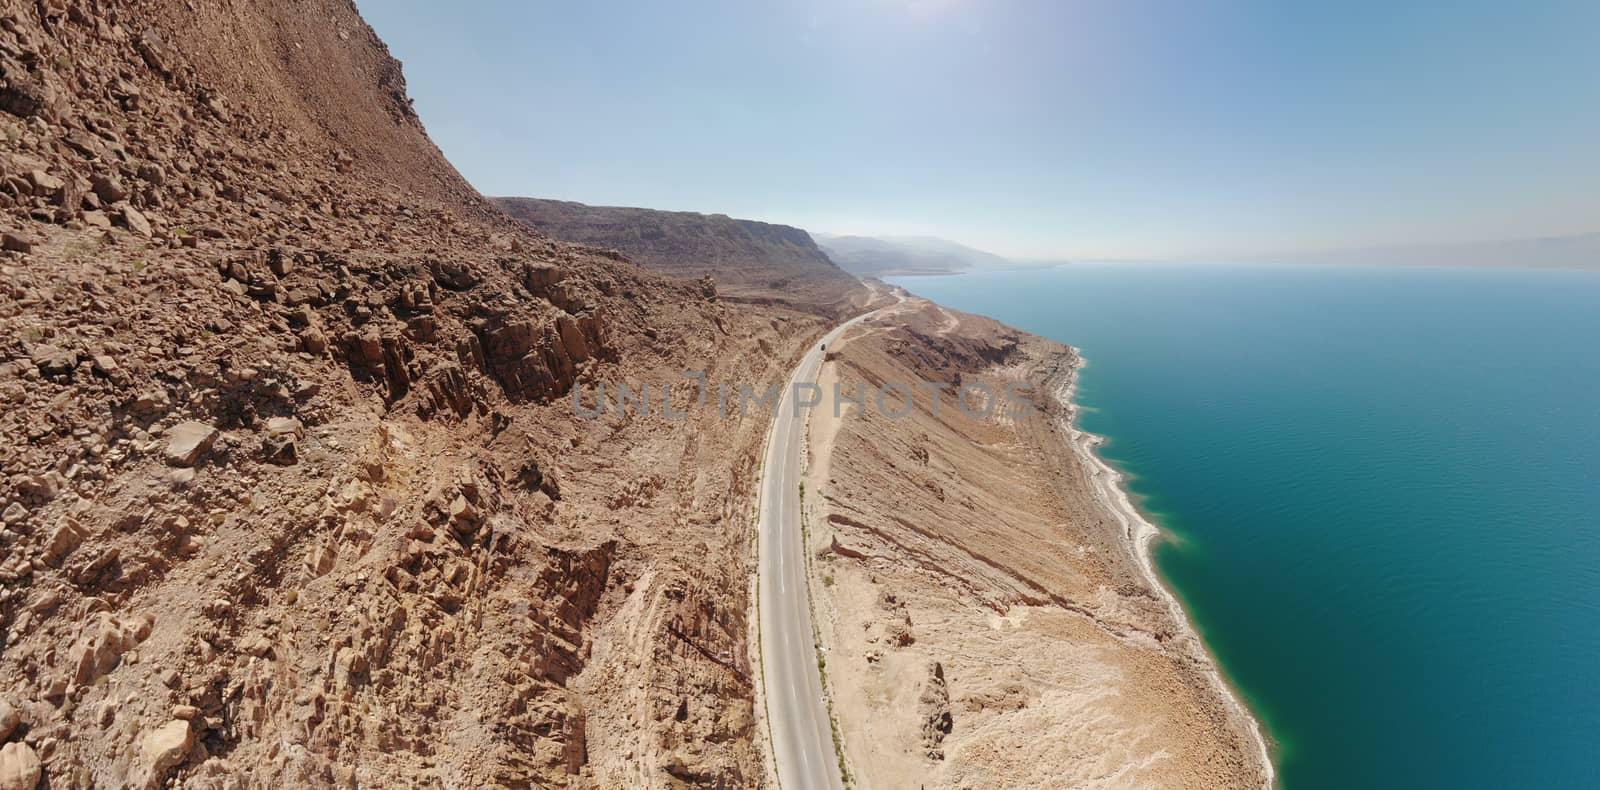 Aerial view from the main road along the Dead Sea, taken with the drone close to the rocks of the ascending mountains by geogif